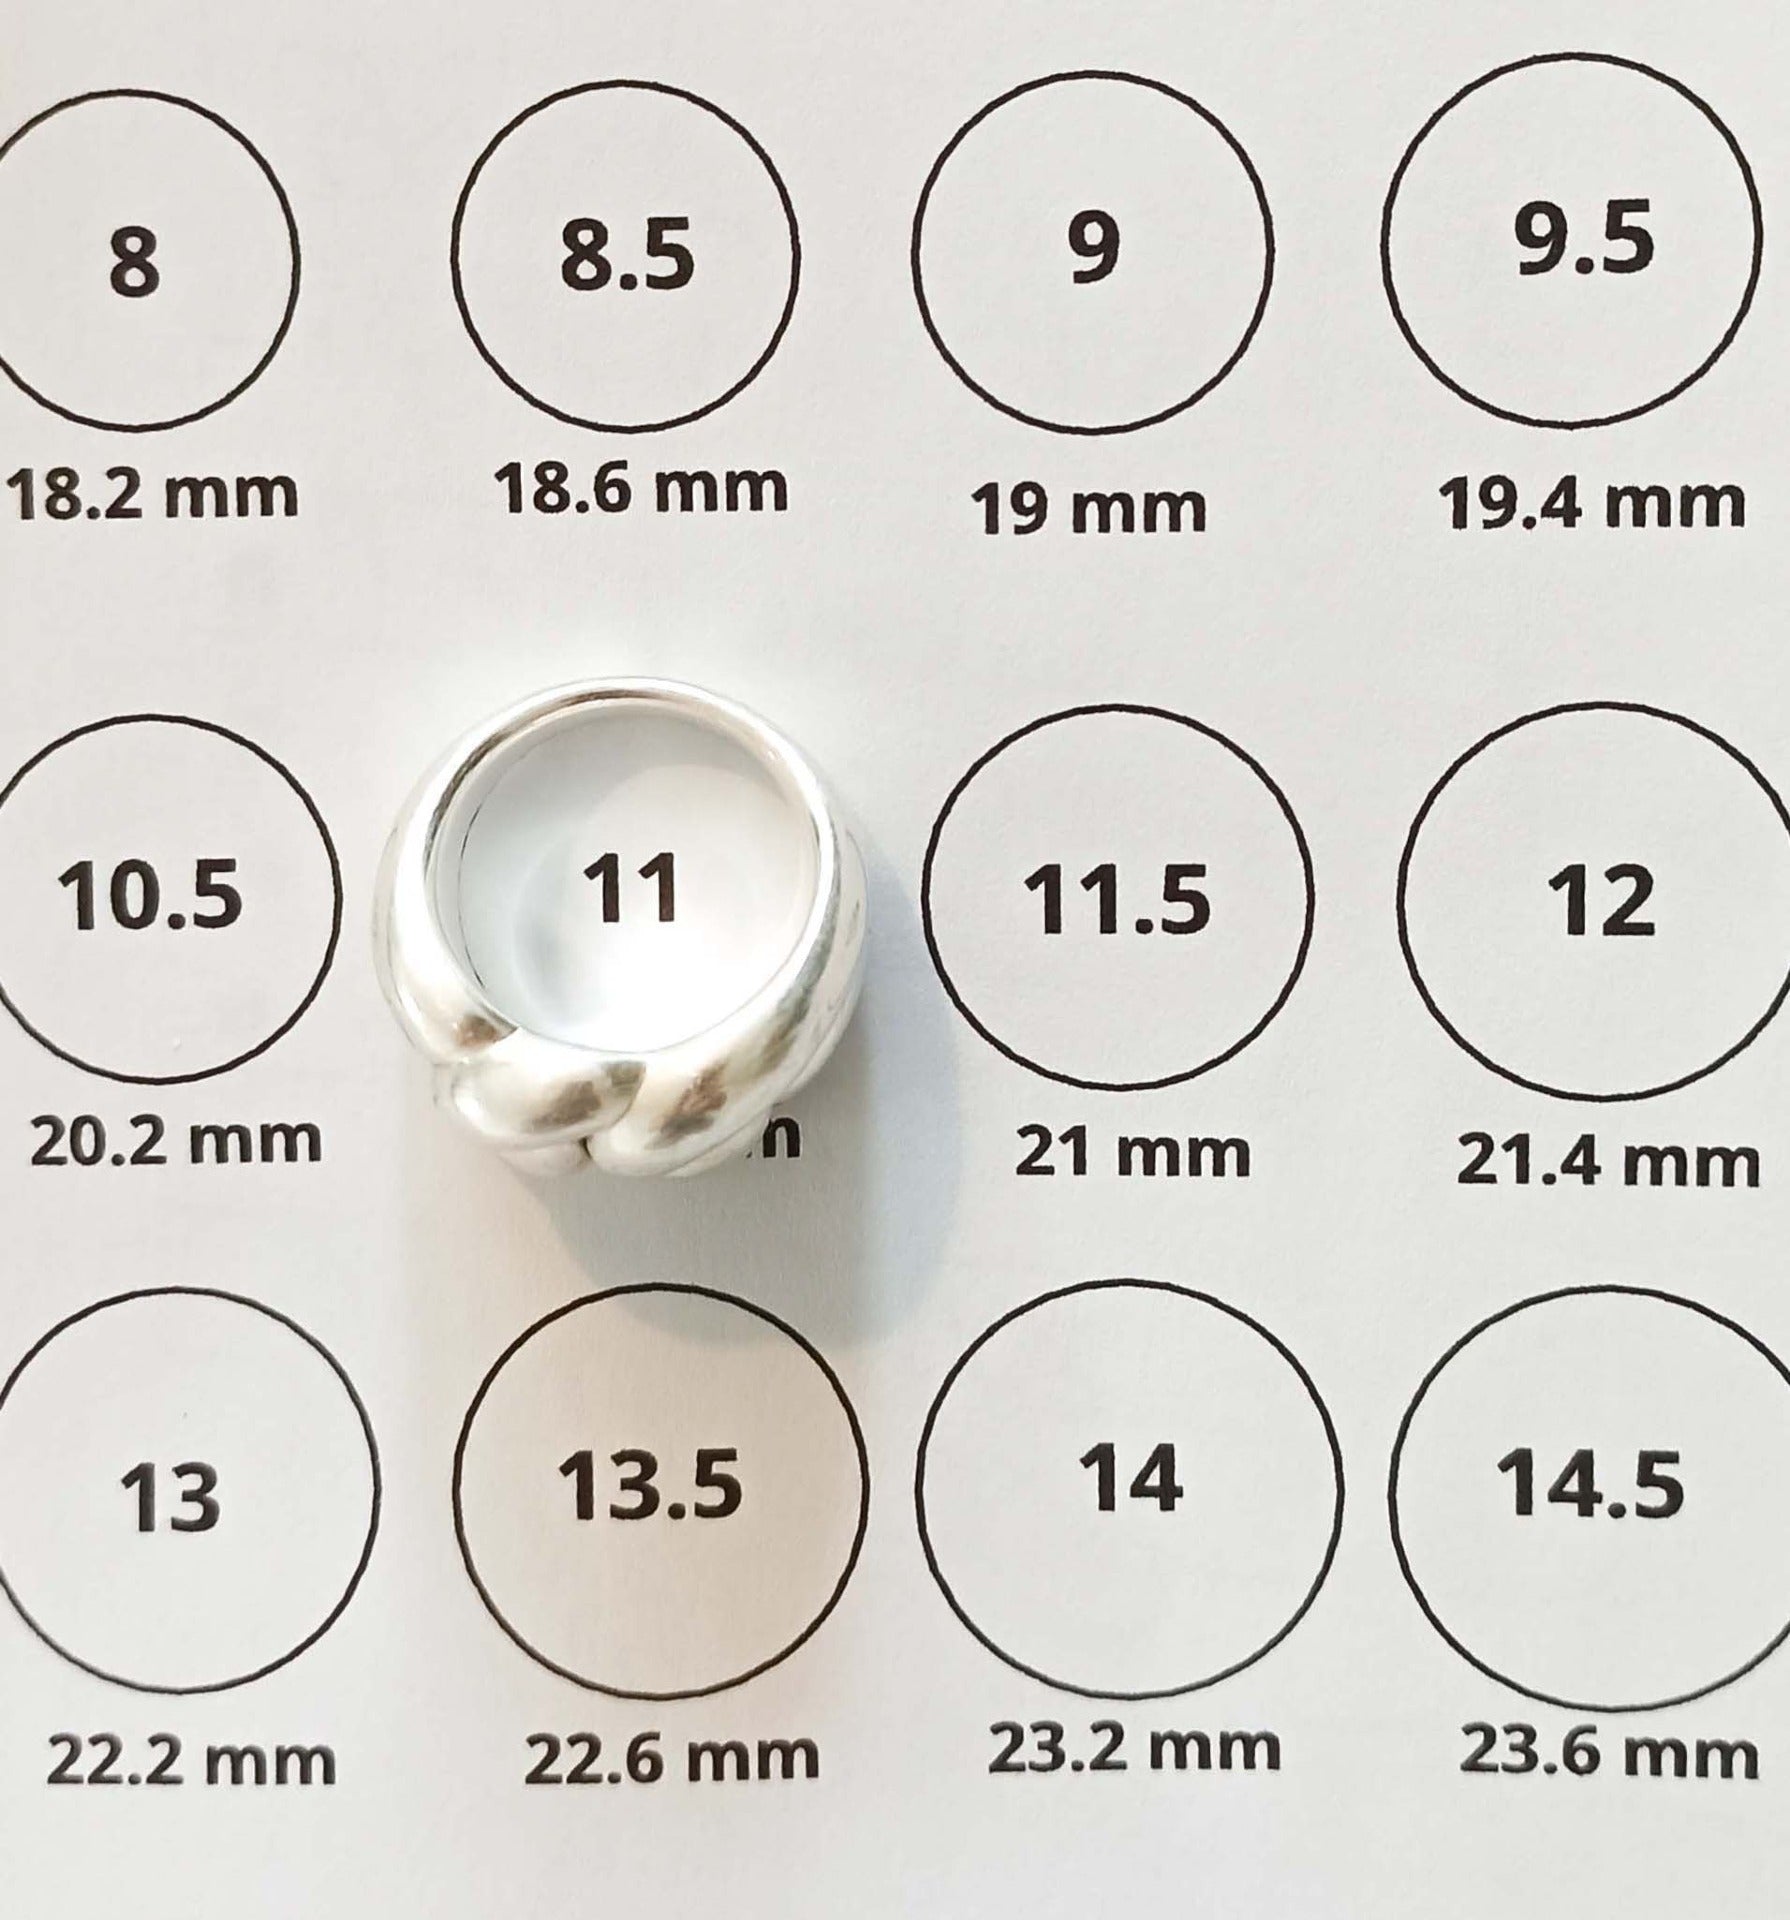 cuemars ring size chart how to measure your ring size